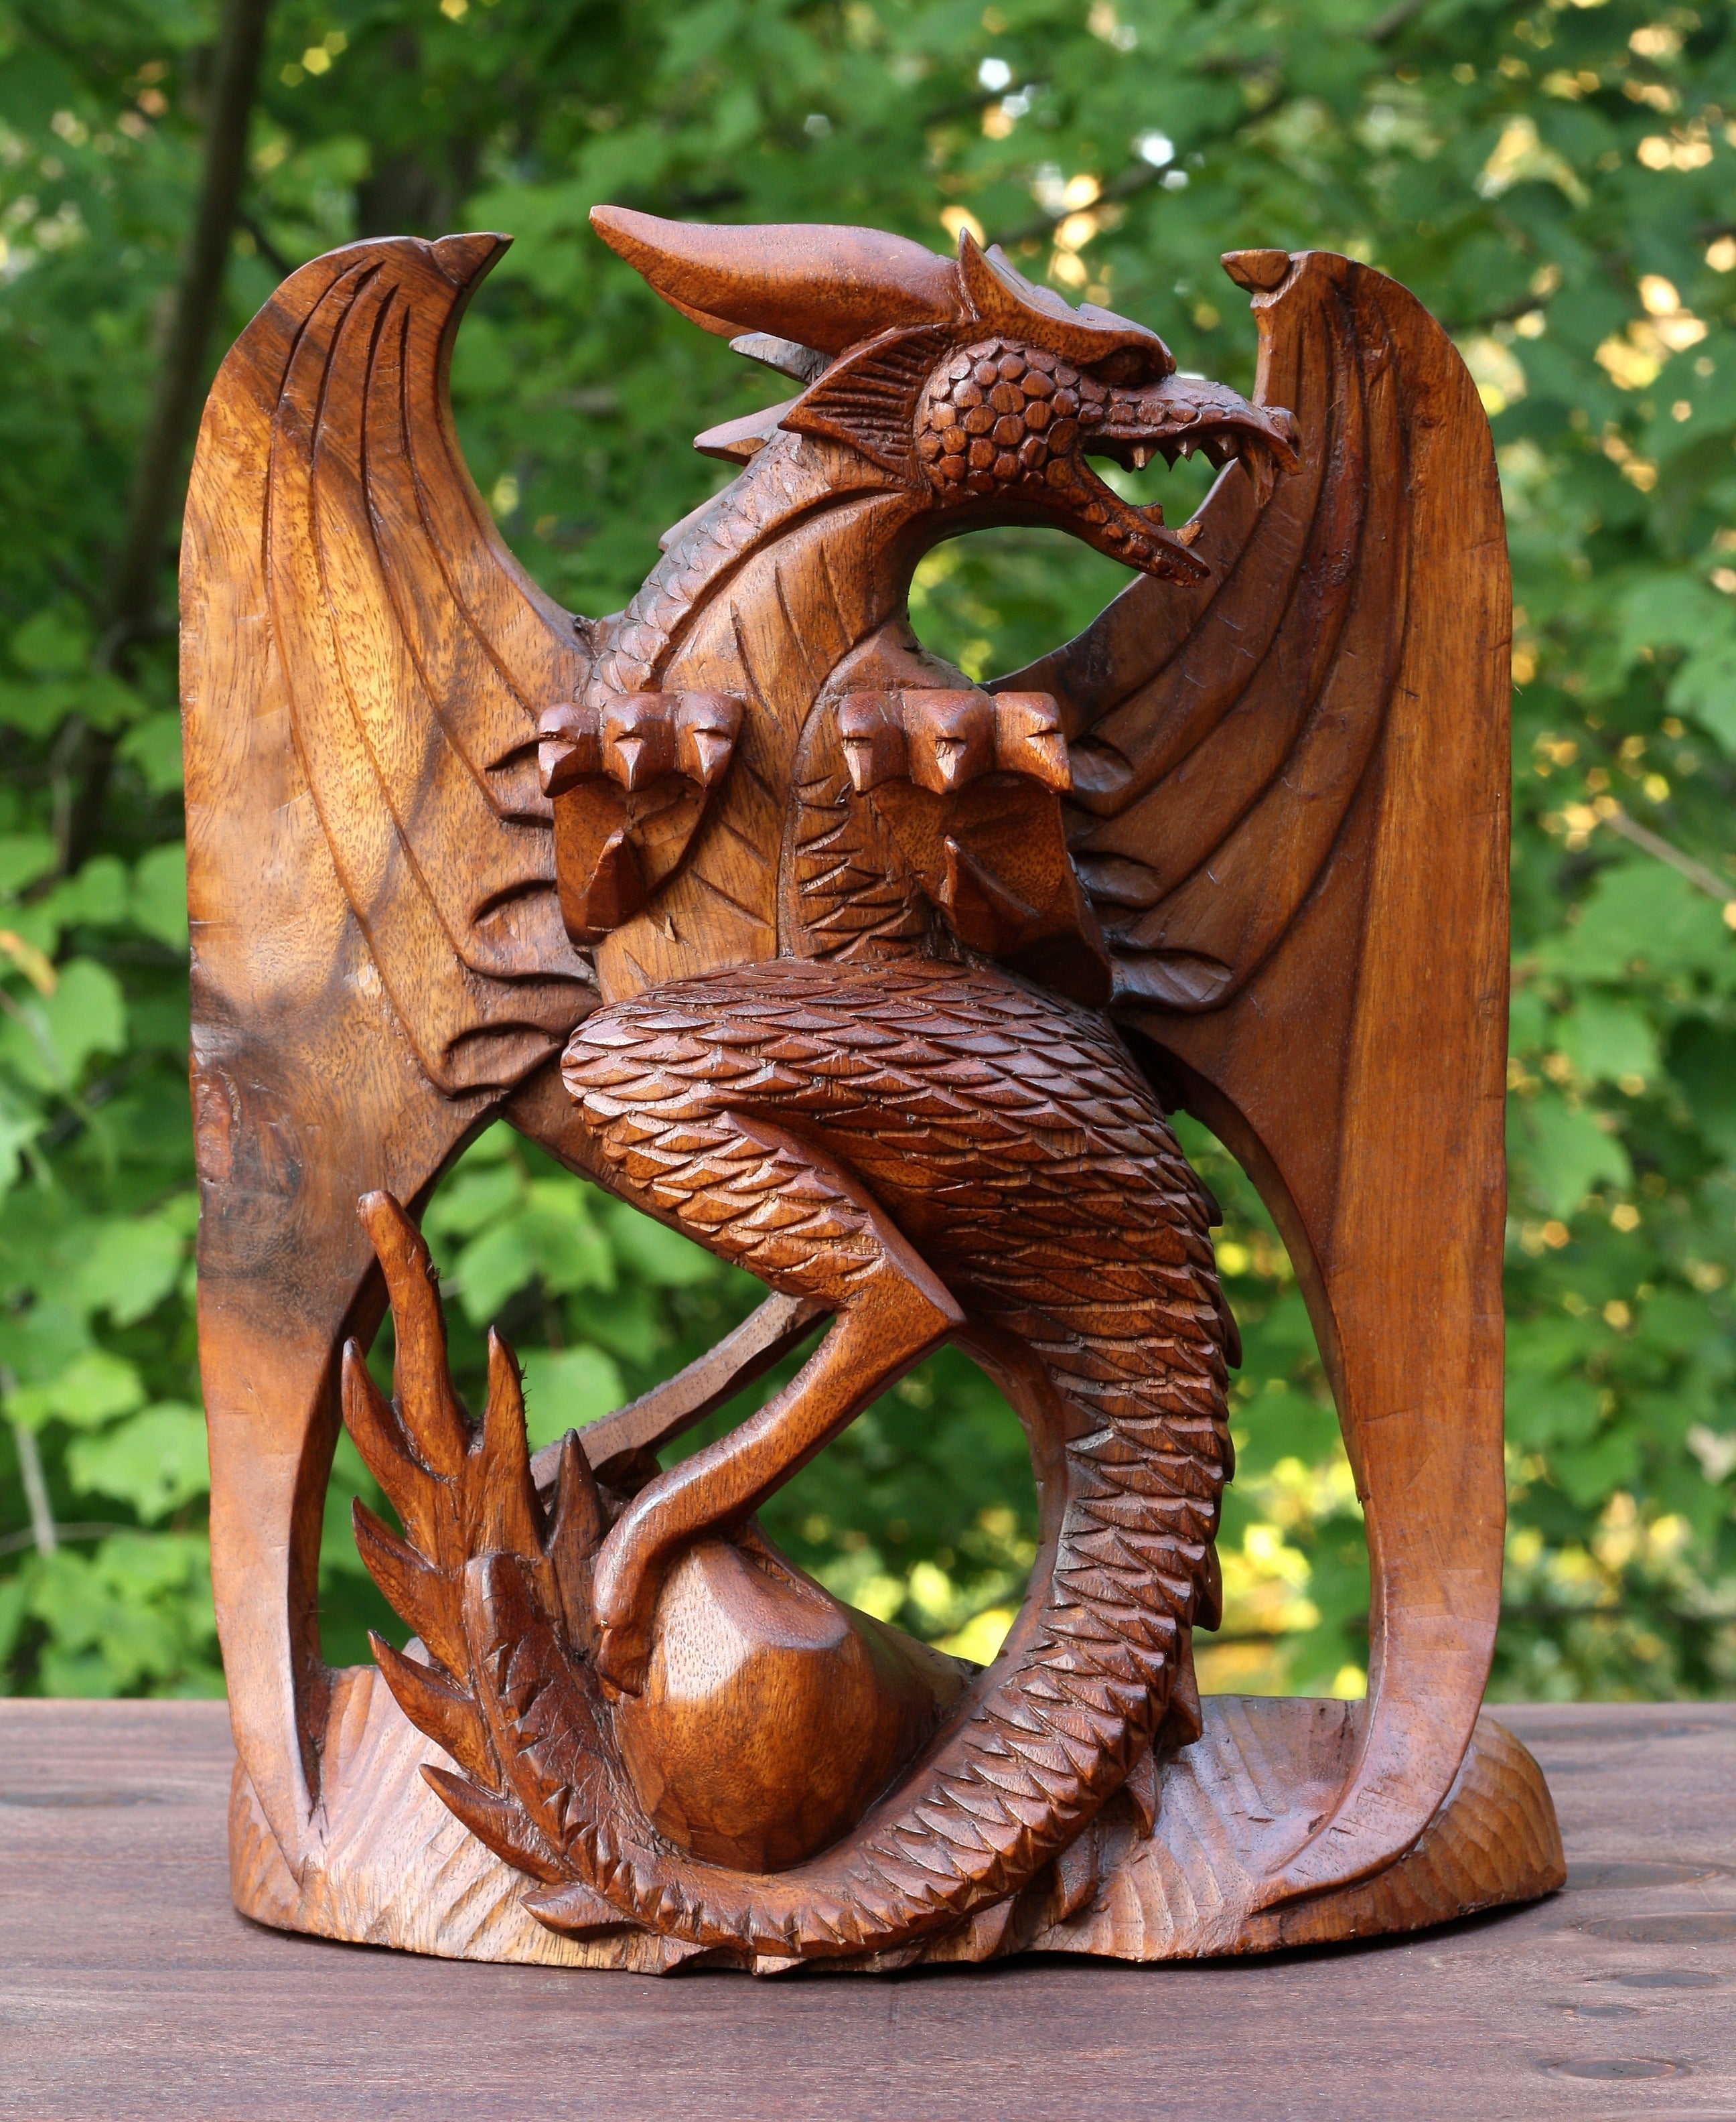 Wooden Crawling Dragon Handmade Sculpture Statue Handcrafted Gift Art  Decorative Home Decor Figurine Accent Decoration Artwork Hand Carved Size:  16 long x 7.5 tall x 4 deep 